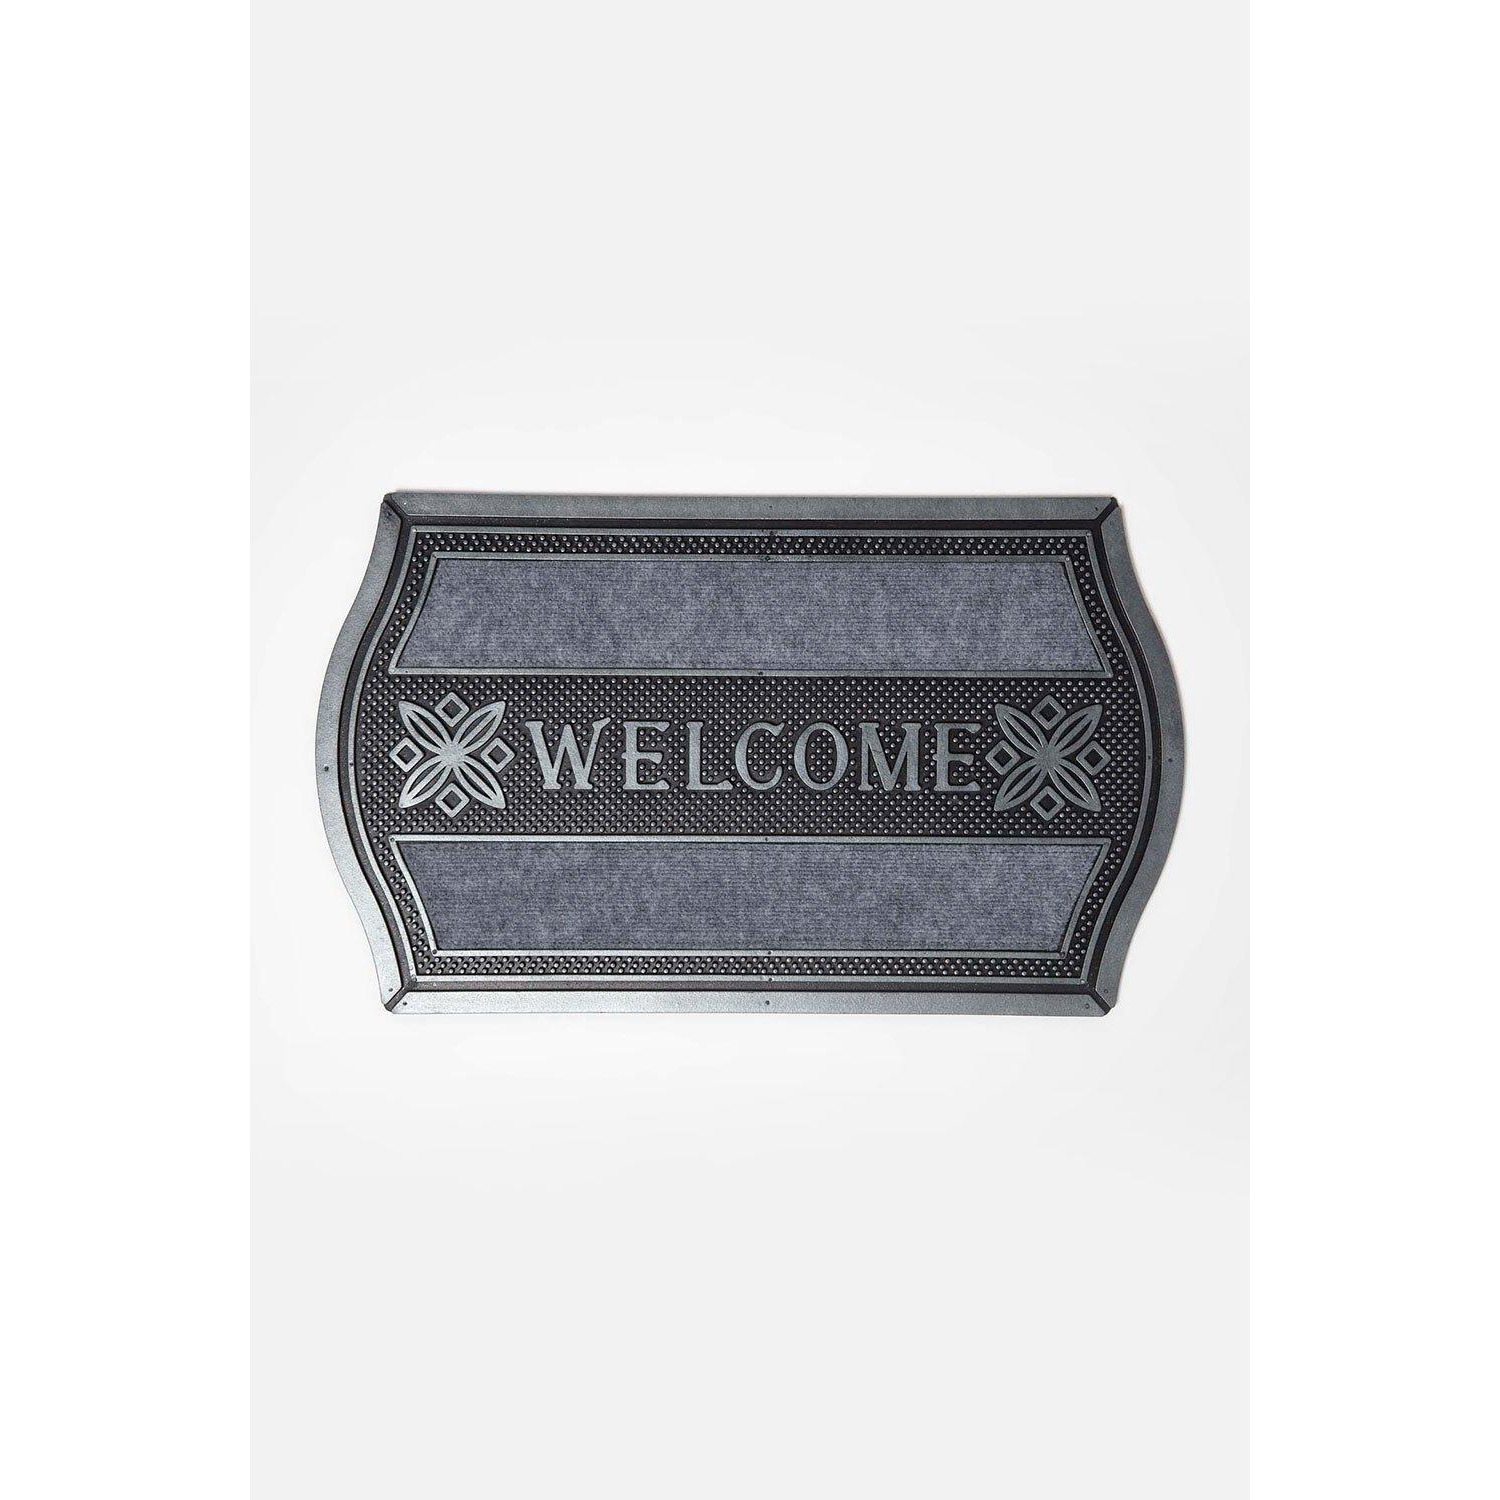 Welcome' Door Mat with Curved Edge, 75 x 45 cm - image 1